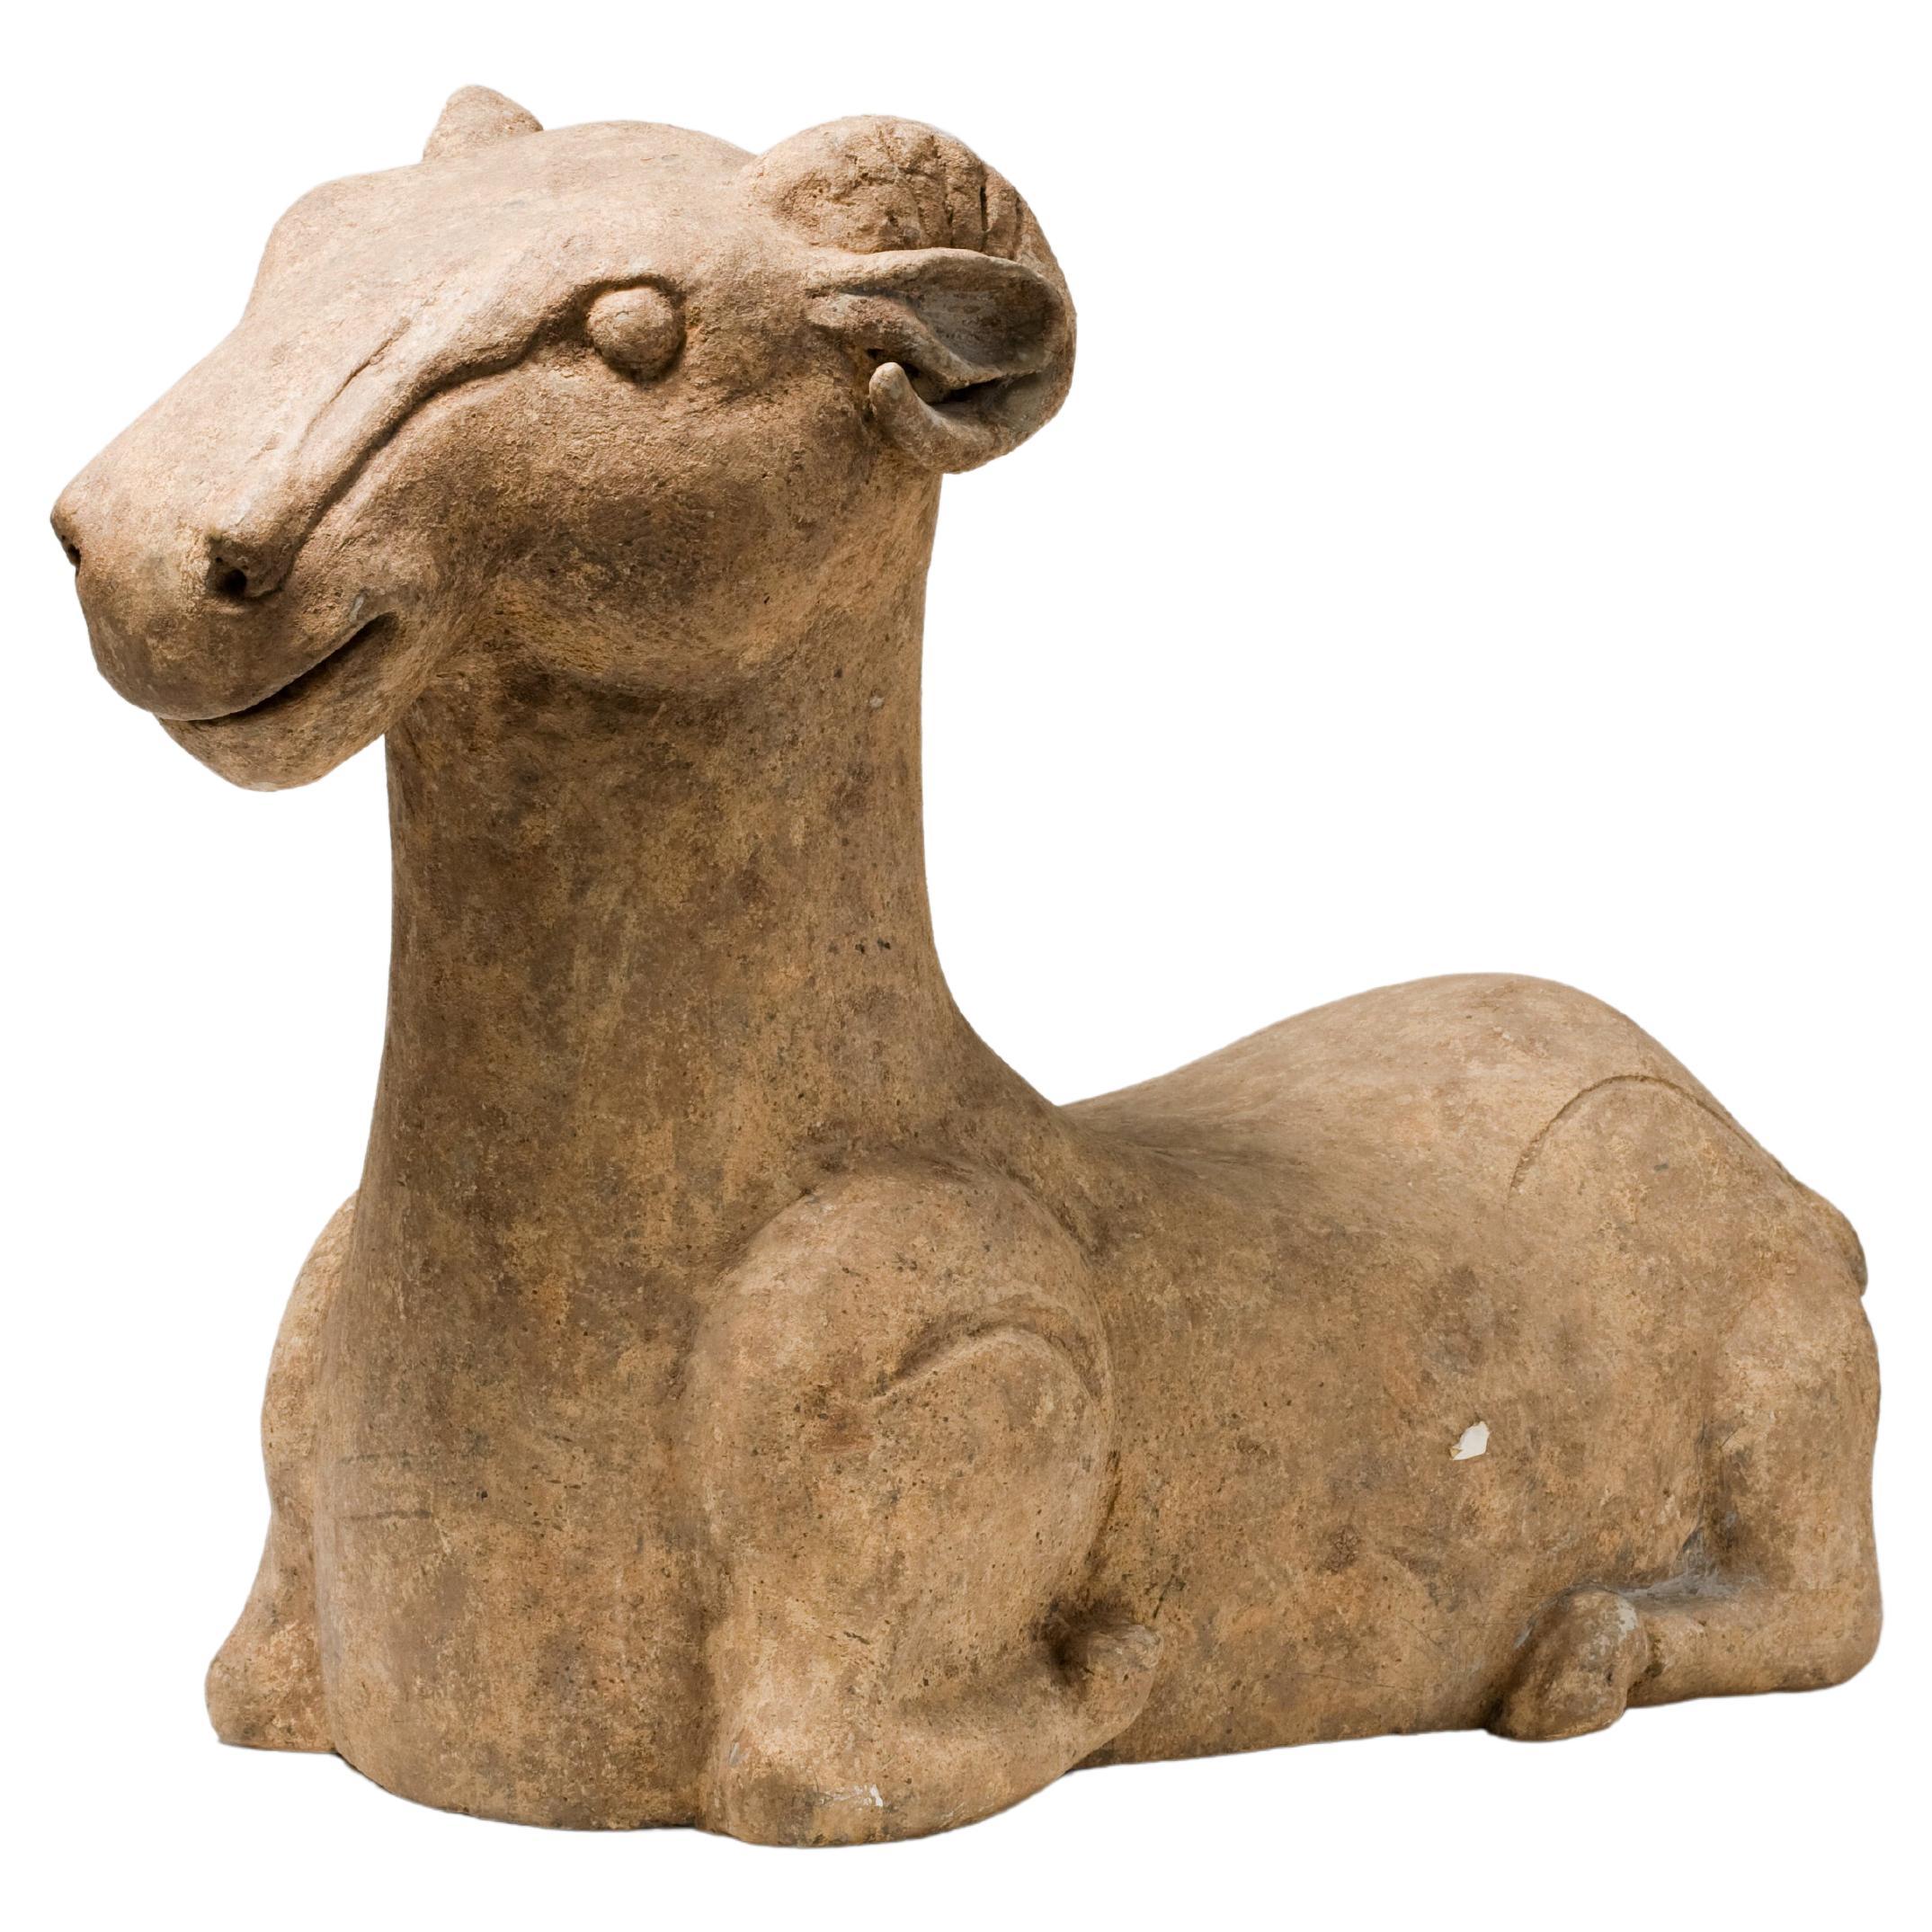 A Large Earthenware Terracotta Goat from the Han Dynasty(206 BC to 220 AD)